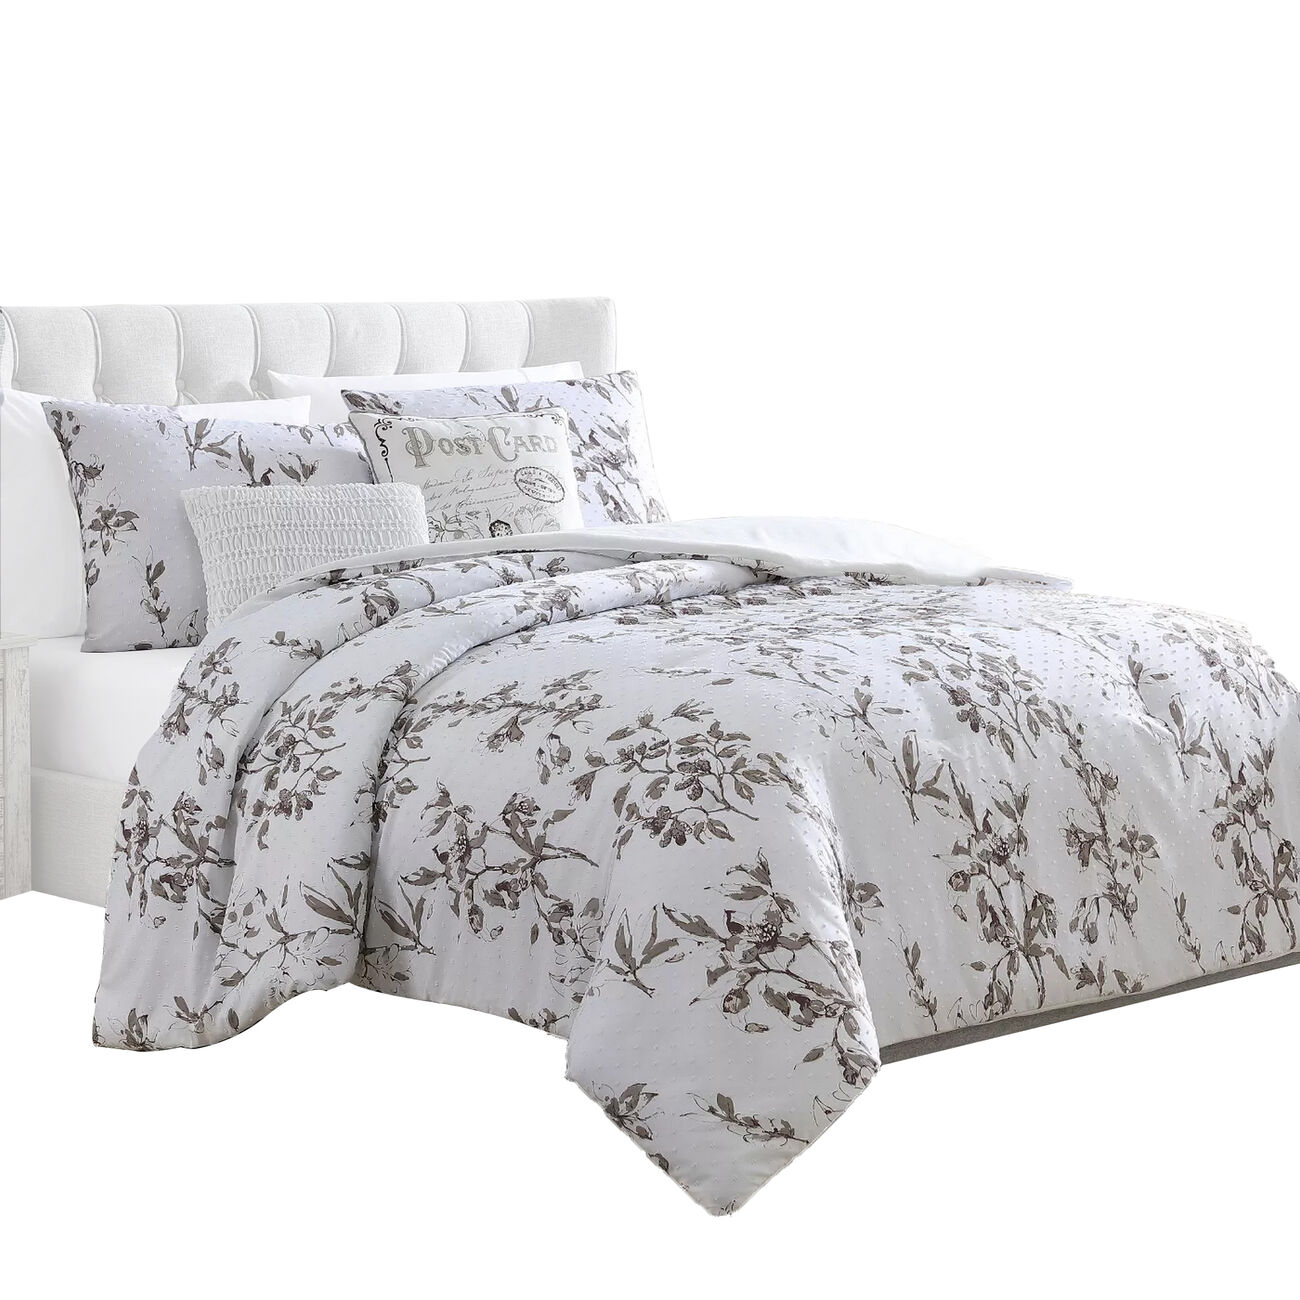 Ohio 5 Piece King Comforter Set with Floral Details, White by The Urban Port